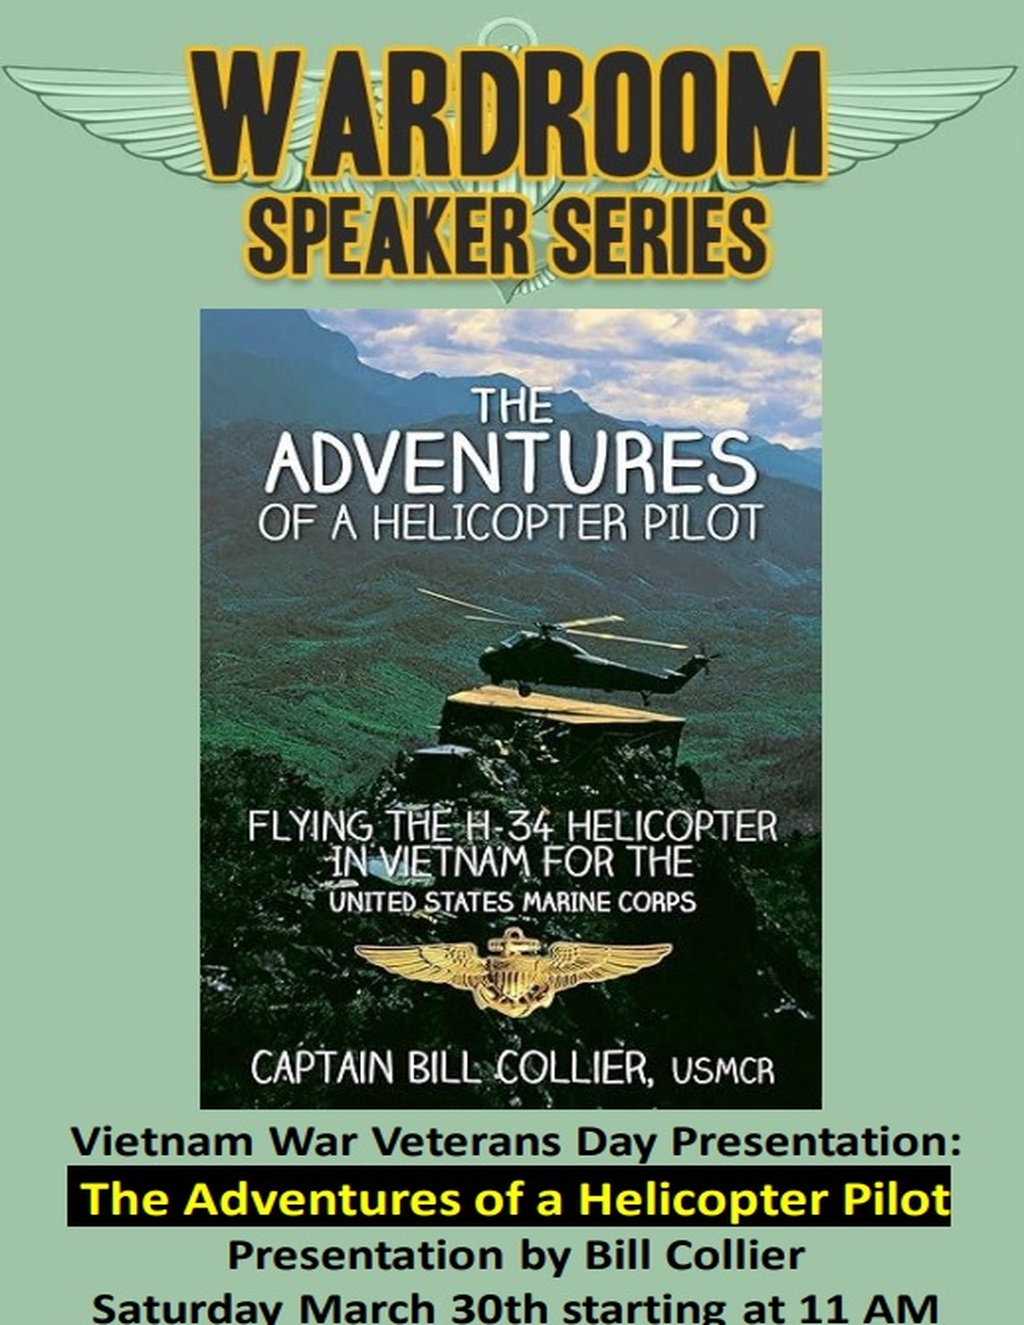 USS Hornet   Sea  Air and Space Museum Join Us for the Wardroom Speaker Series  The Adventures of a Helicopter Pilot promotion flier on Digifli com